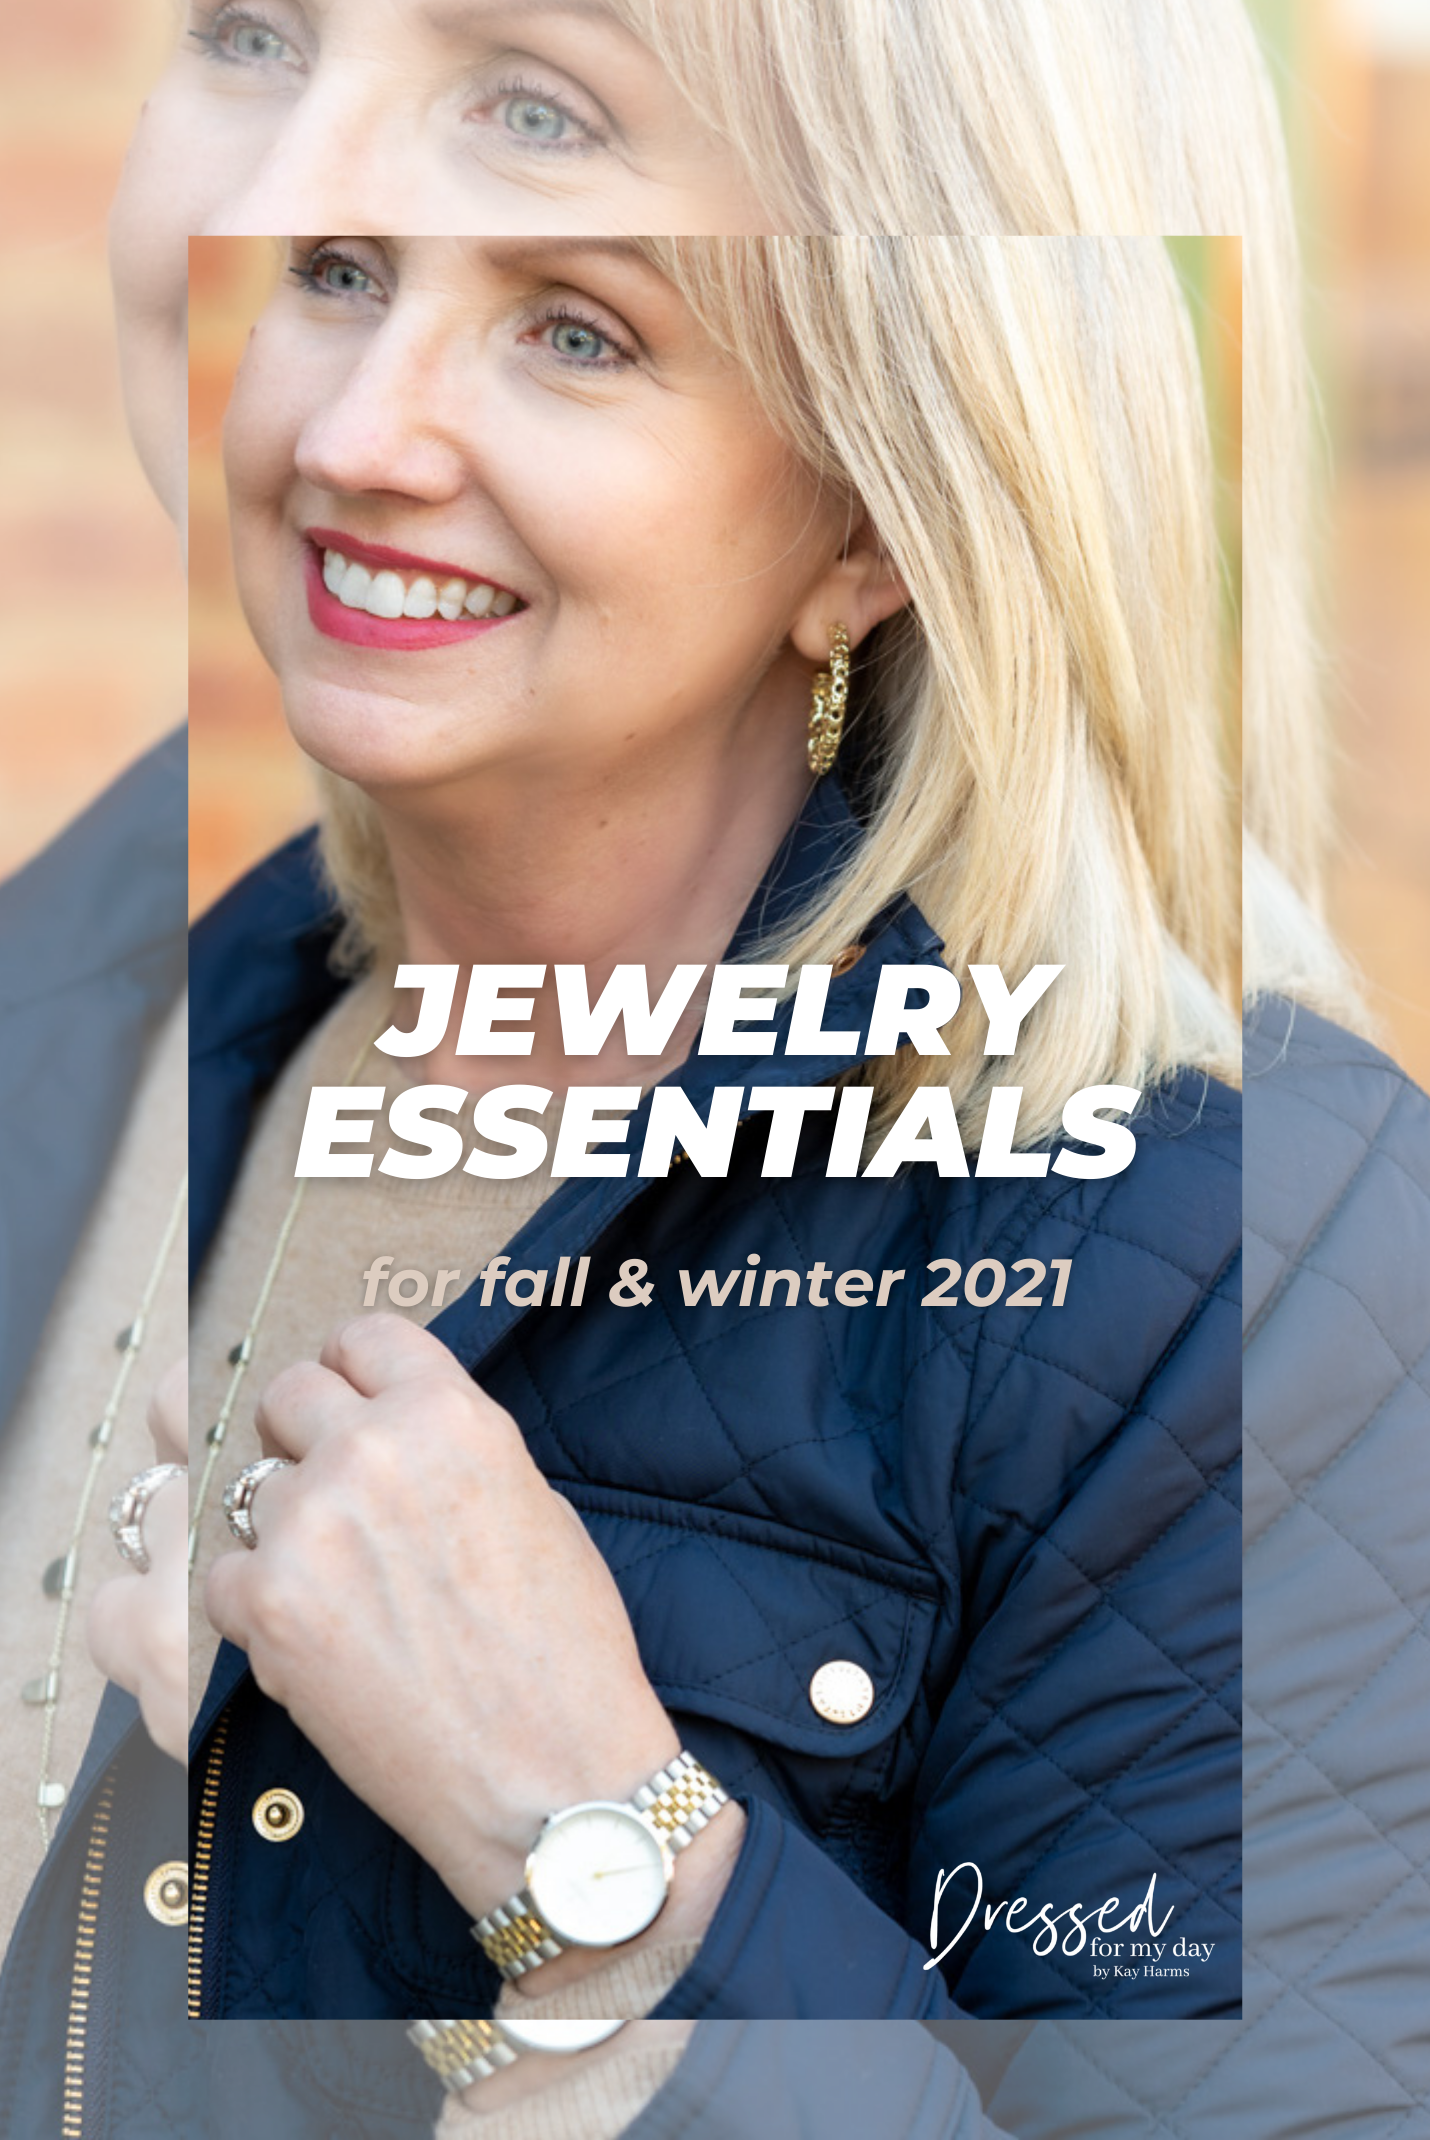 Jewelry essentials for Fall and Winter 2021